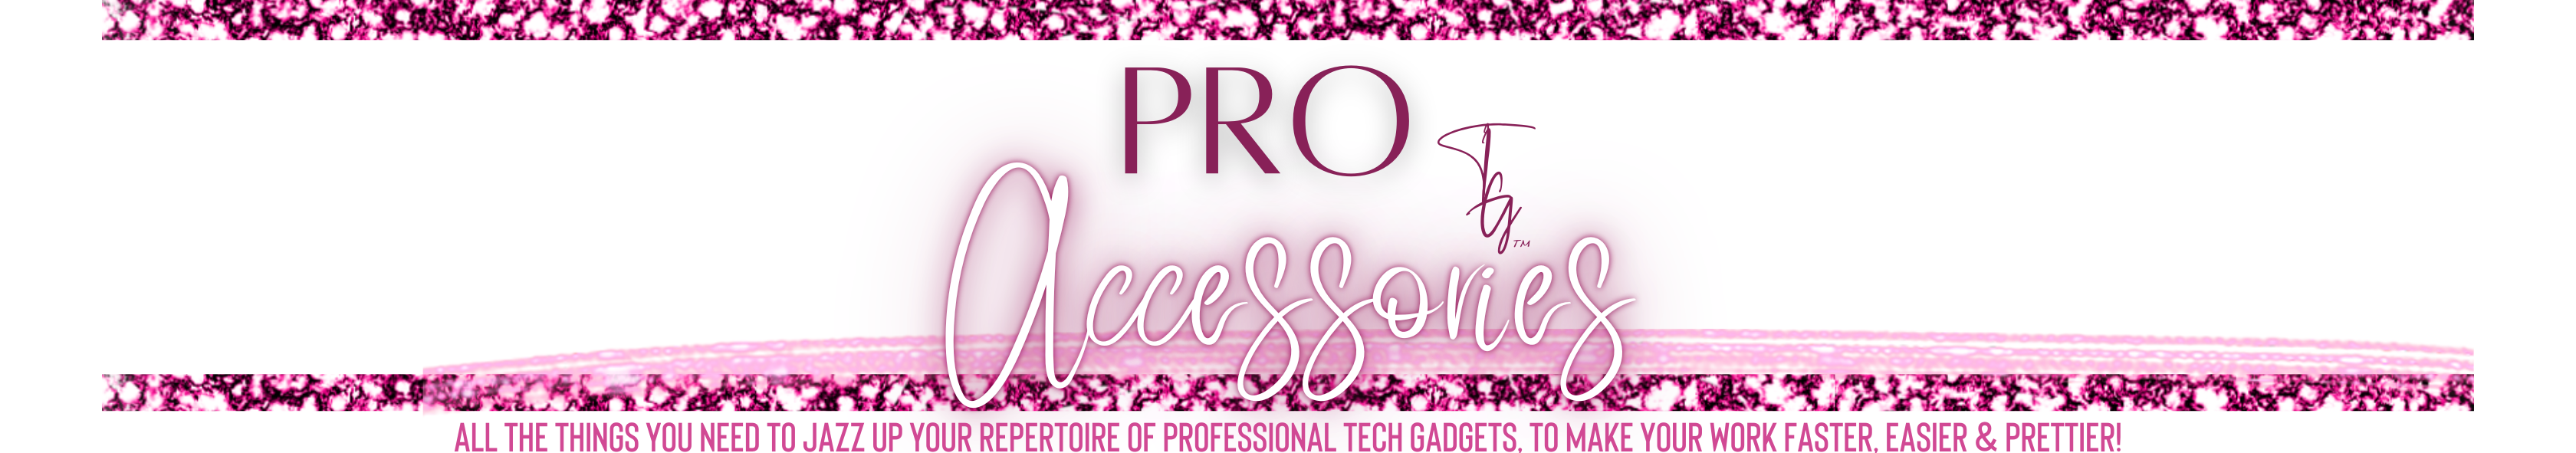 012533605911462-accessories-page-header.png